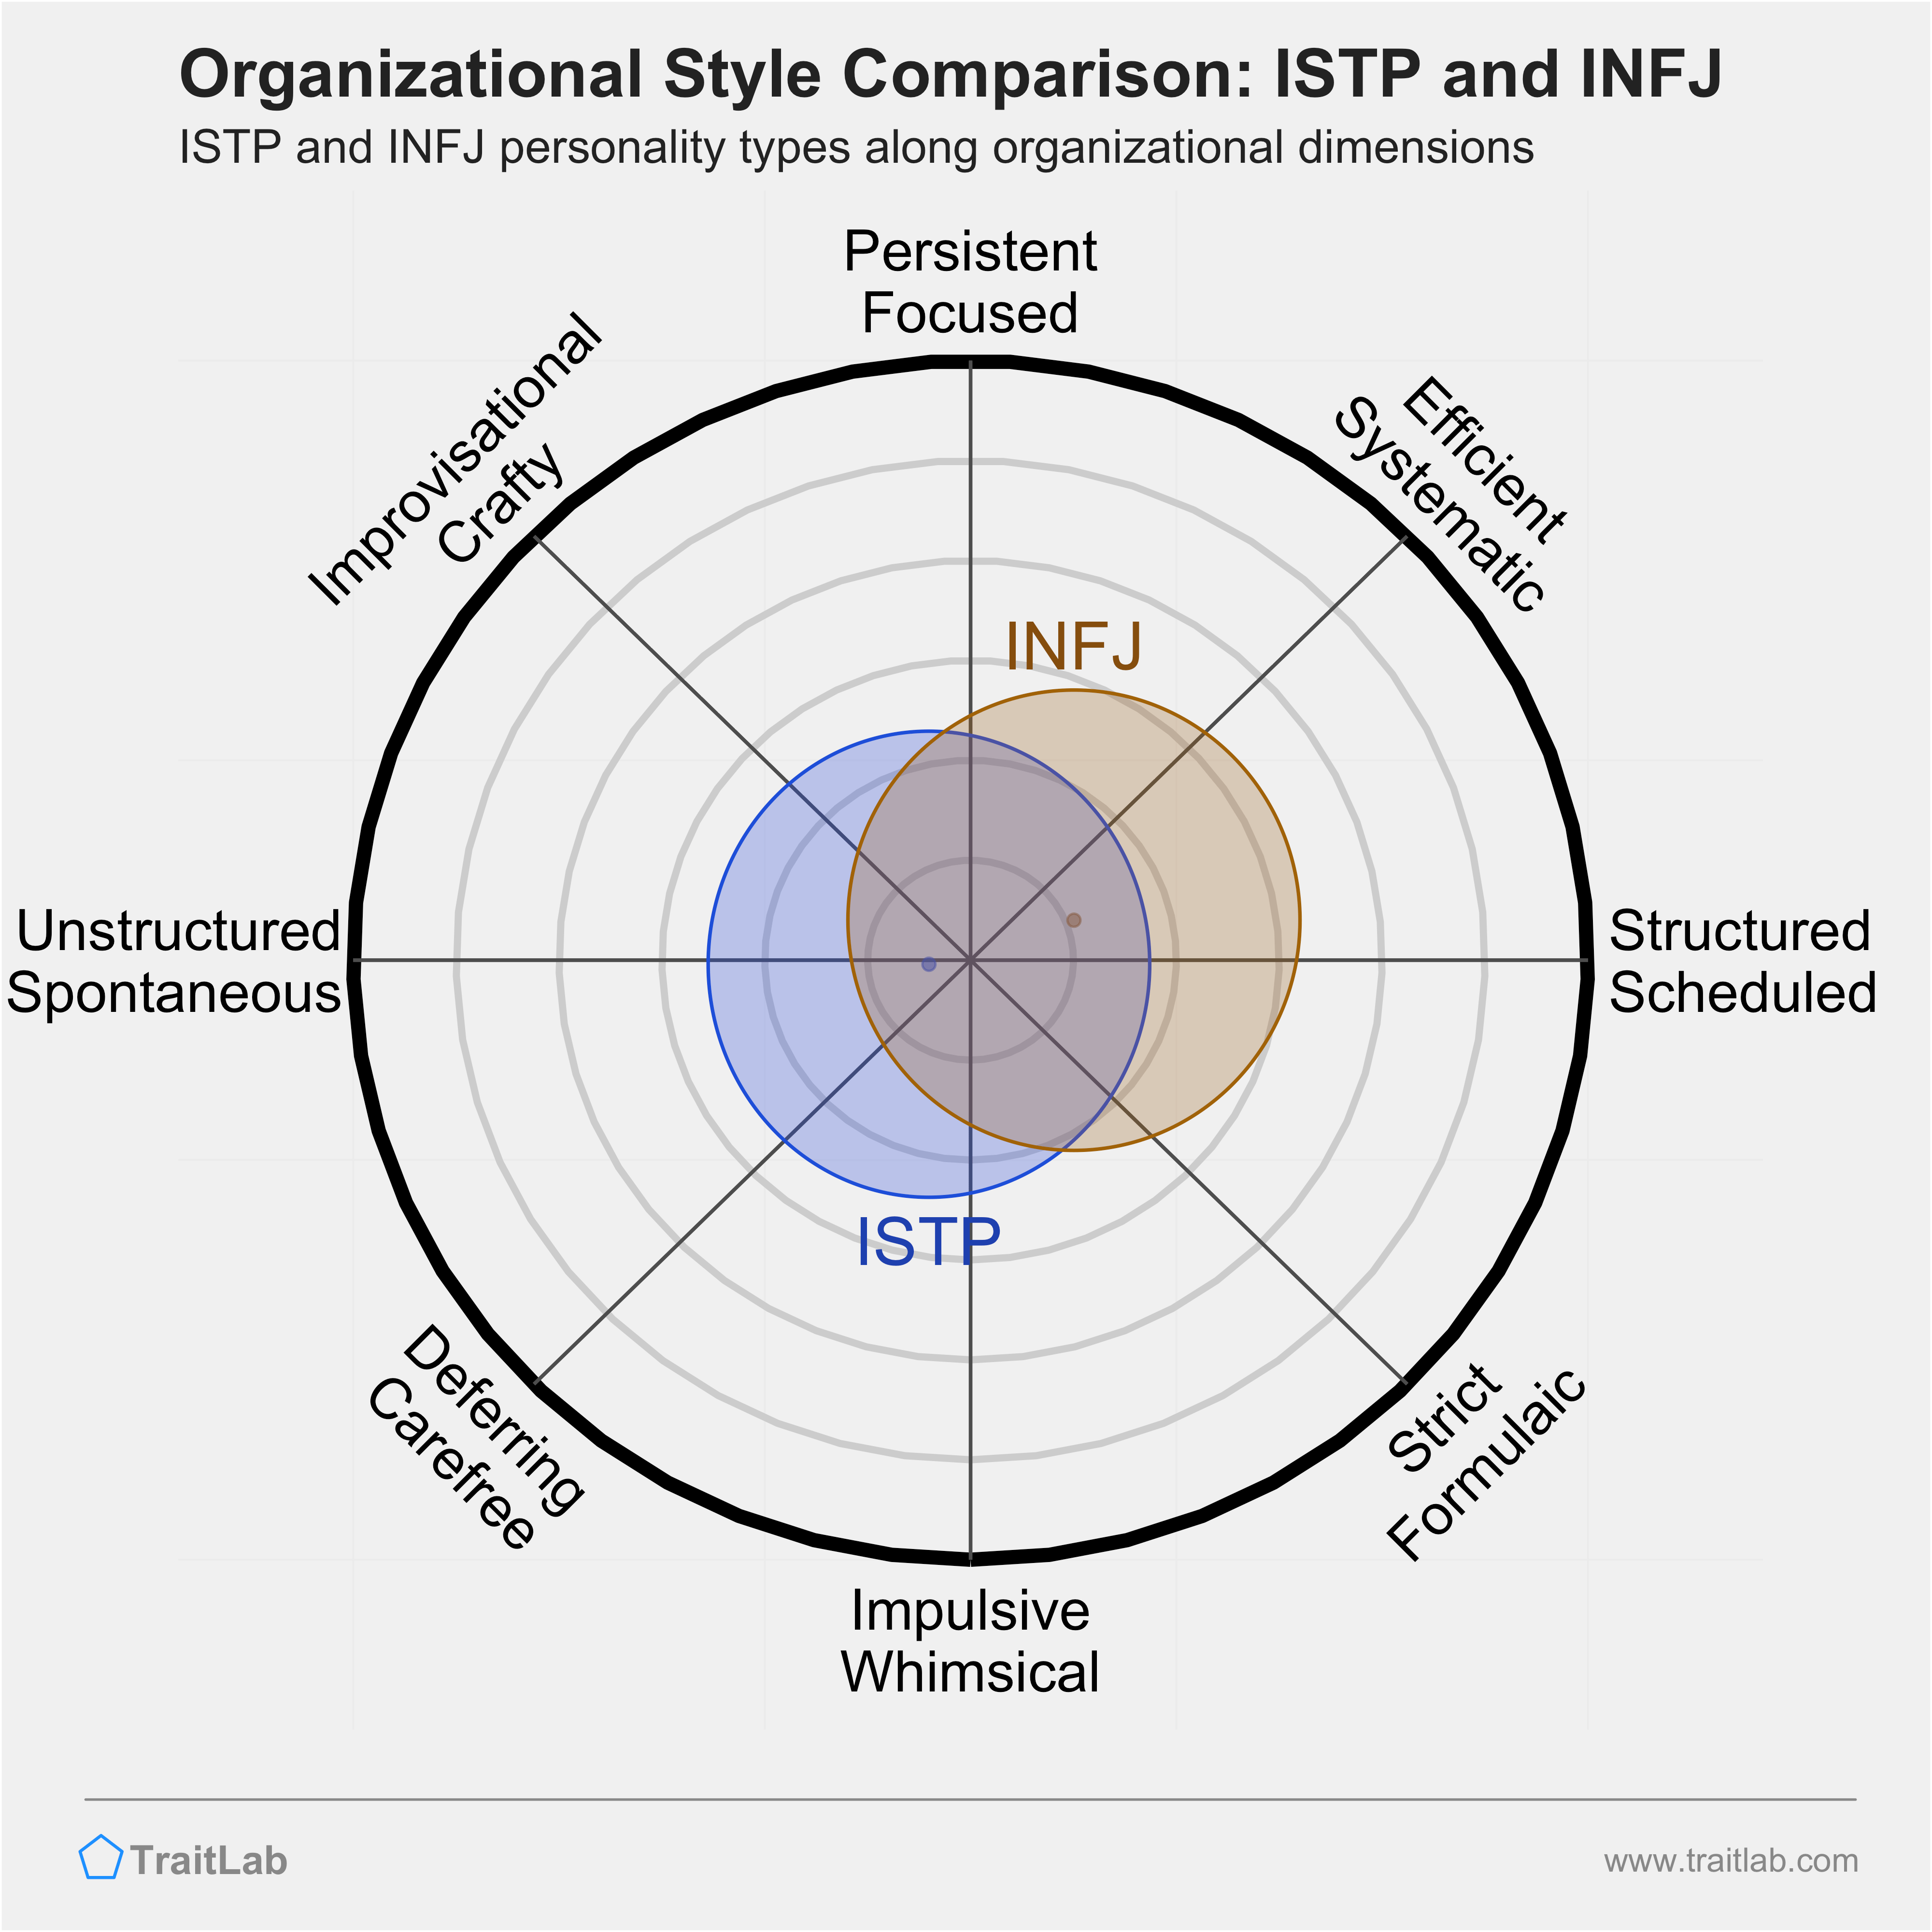 ISTP and INFJ comparison across organizational dimensions